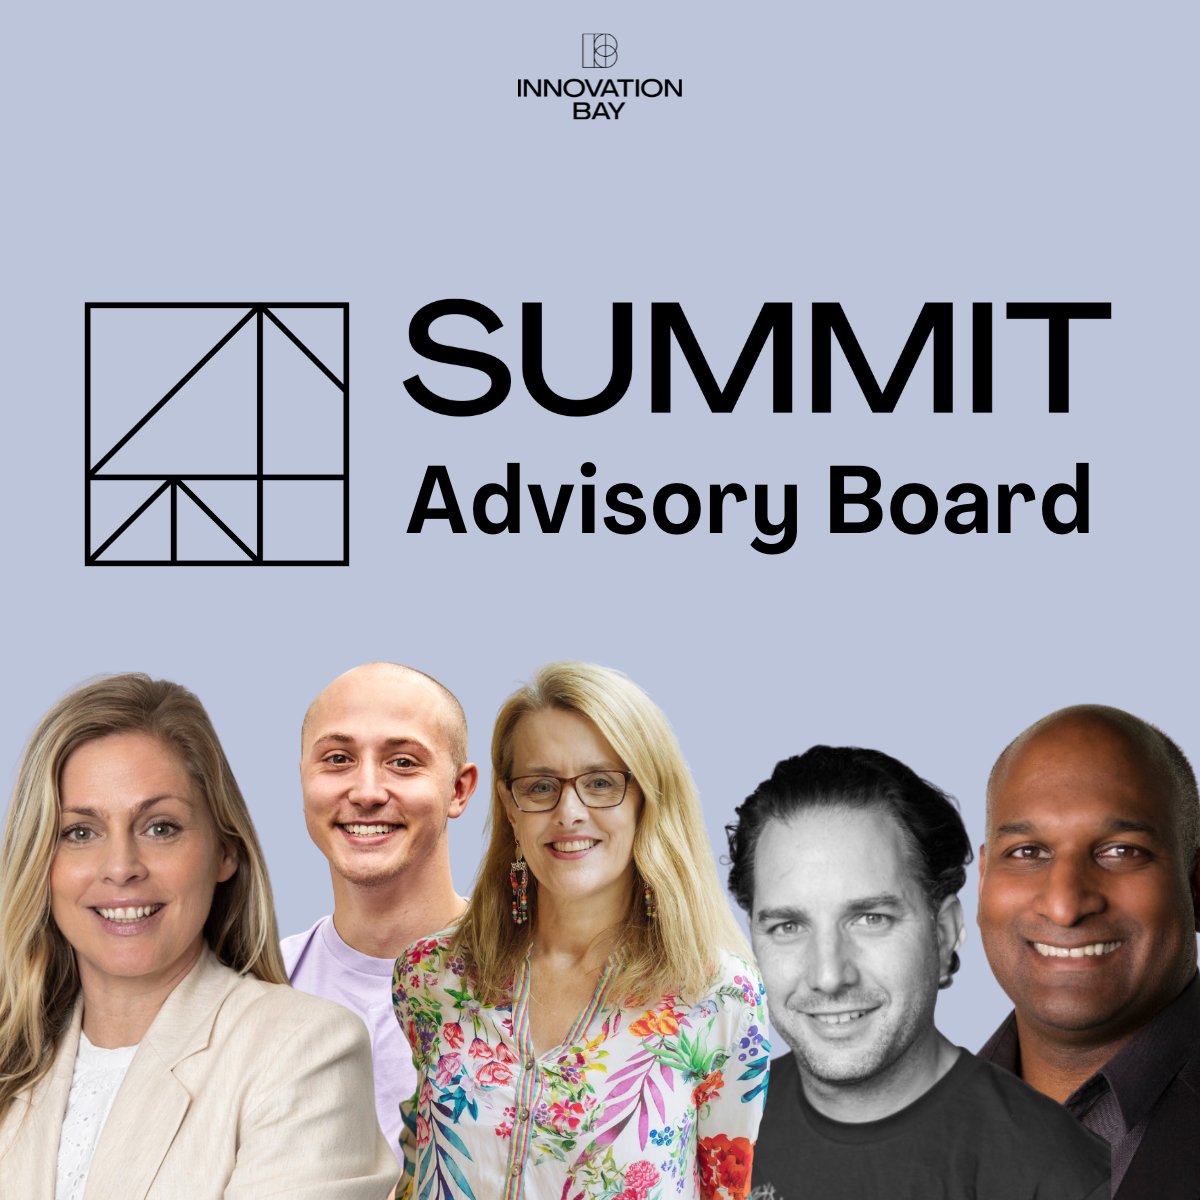 📣 Announcing the Summit Advisory Board These diverse voices will play a critical role in guiding our founder community: Cibby Pulikkaseril, Baraja @savve_lisa @How_Too_ Keaton Okkonen @RGBA0001 Lucy Lloyd @Mentorloop @hoskioski @HIVERYai 👀 bit.ly/IBblogSAB